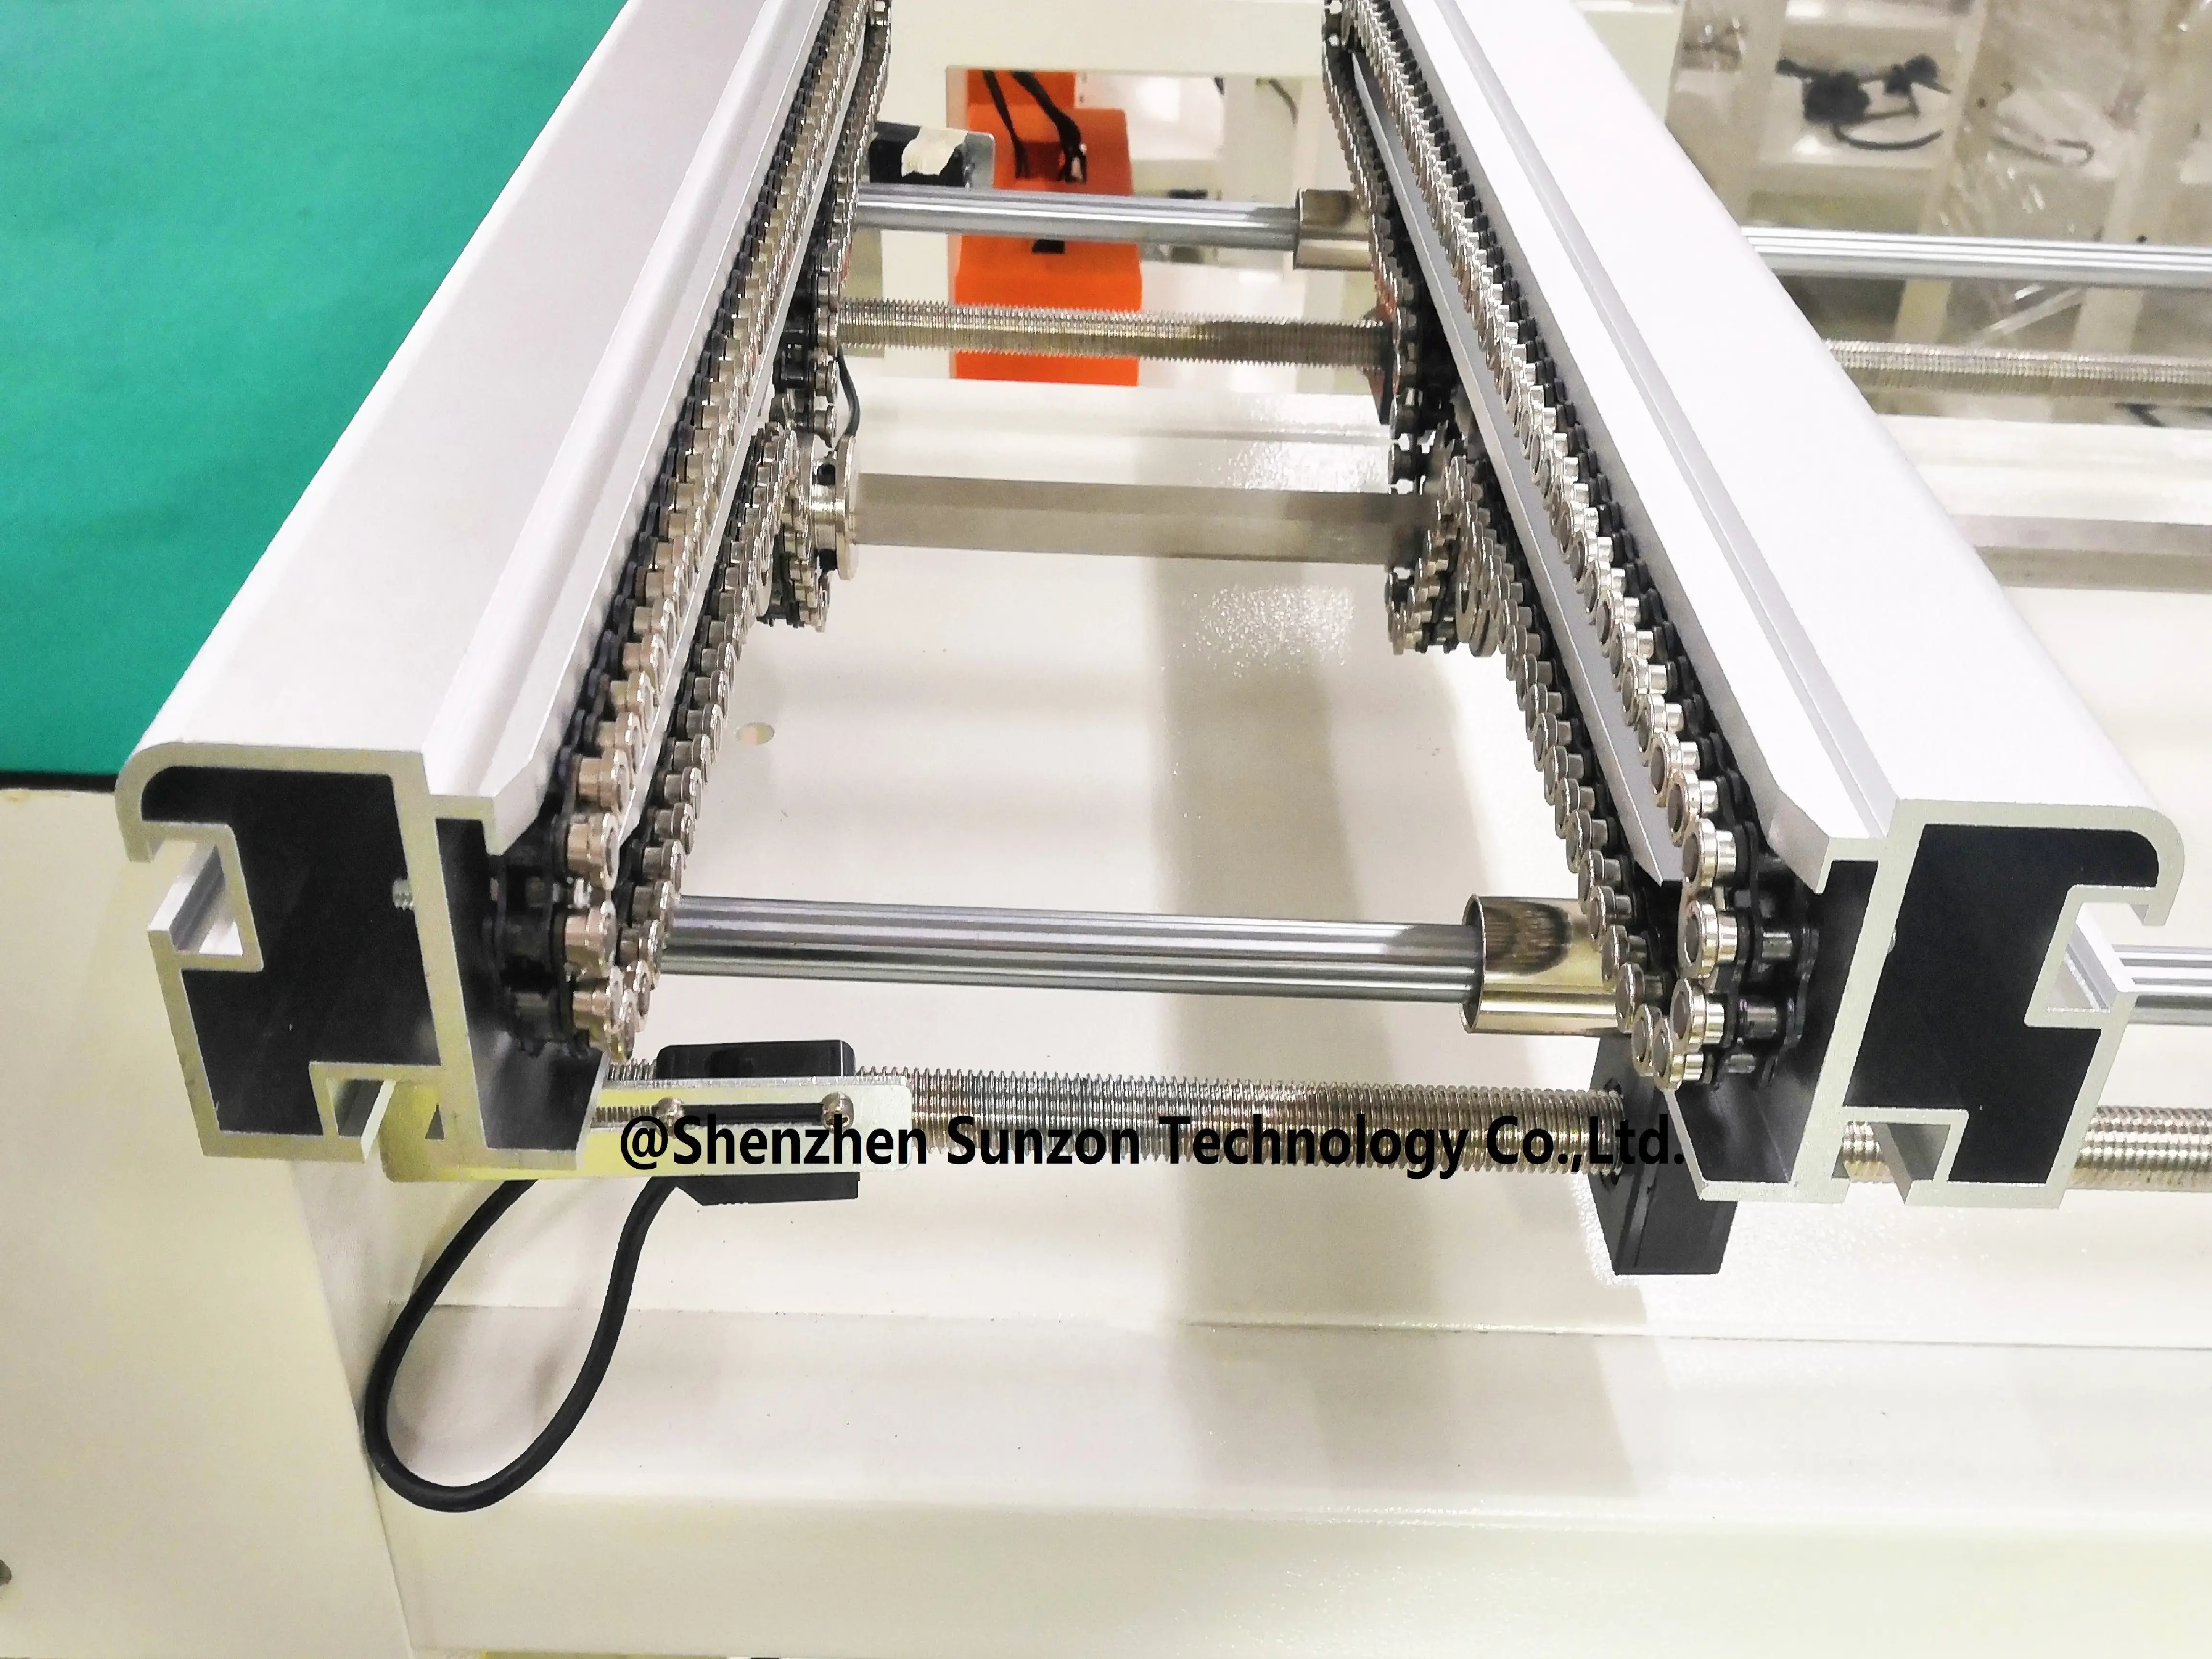 NC-BC-330-C Standard smt pcb conveyor with cover SunzonTech pcb conveyor for smt production line